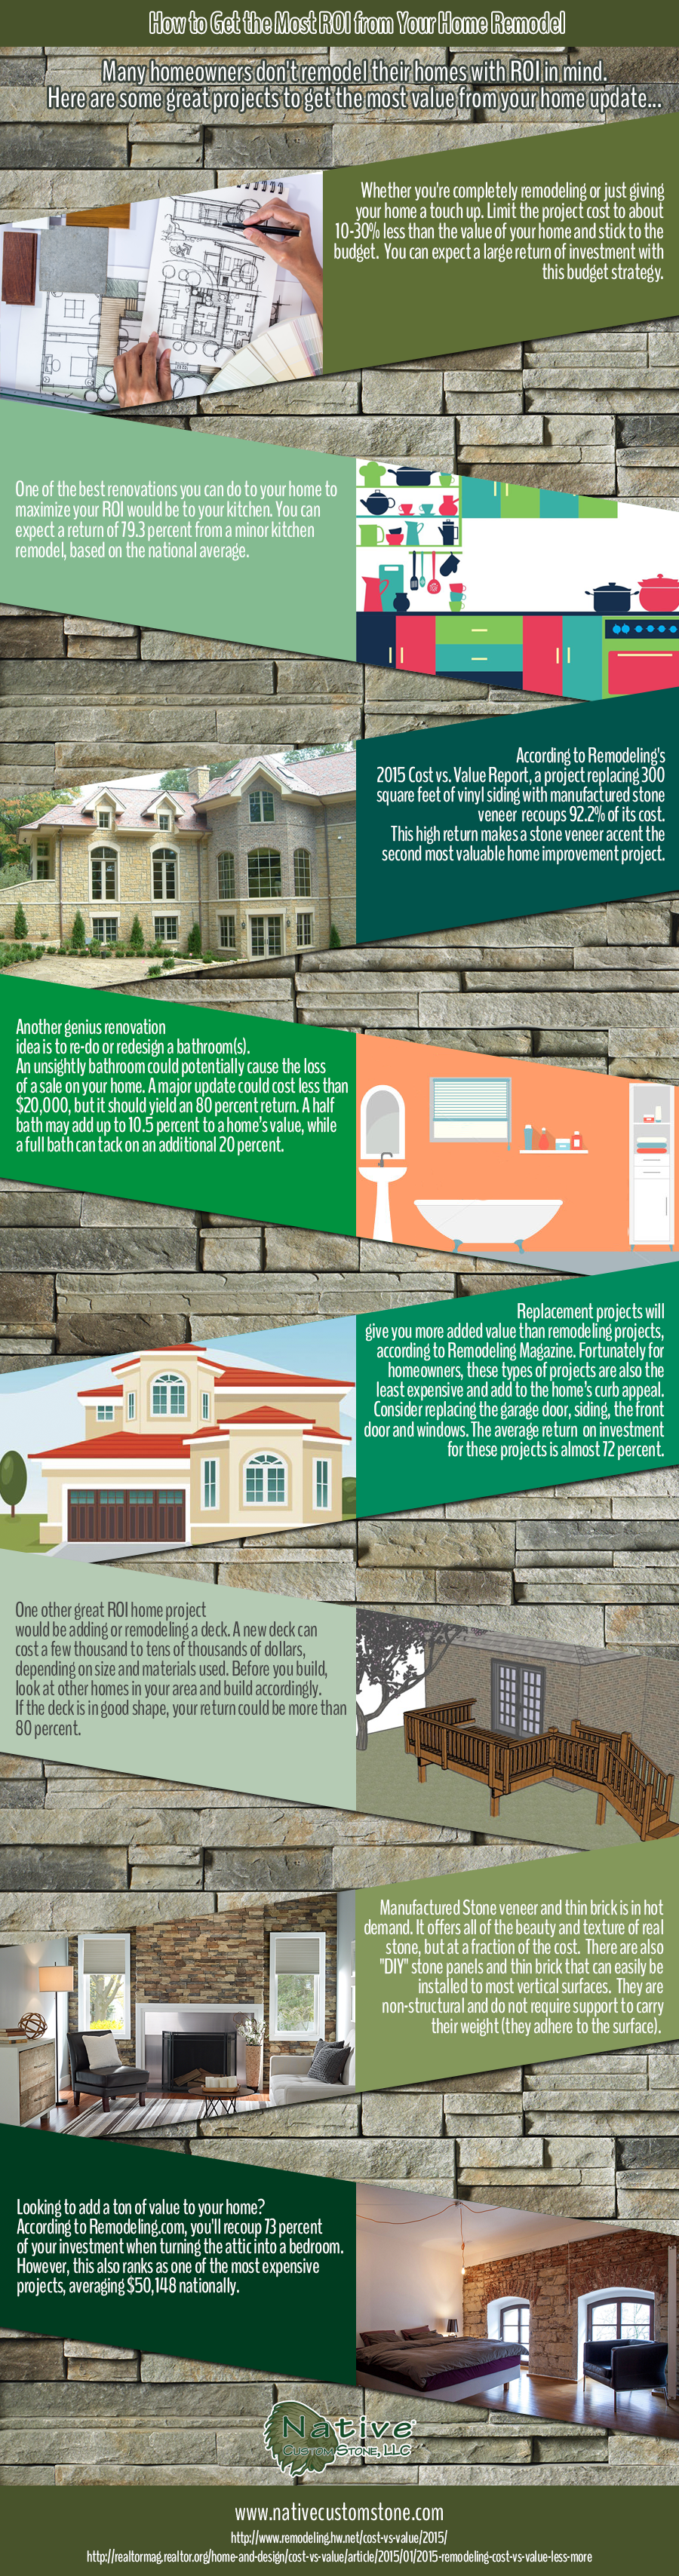 remodel-roi-infographic-ncs